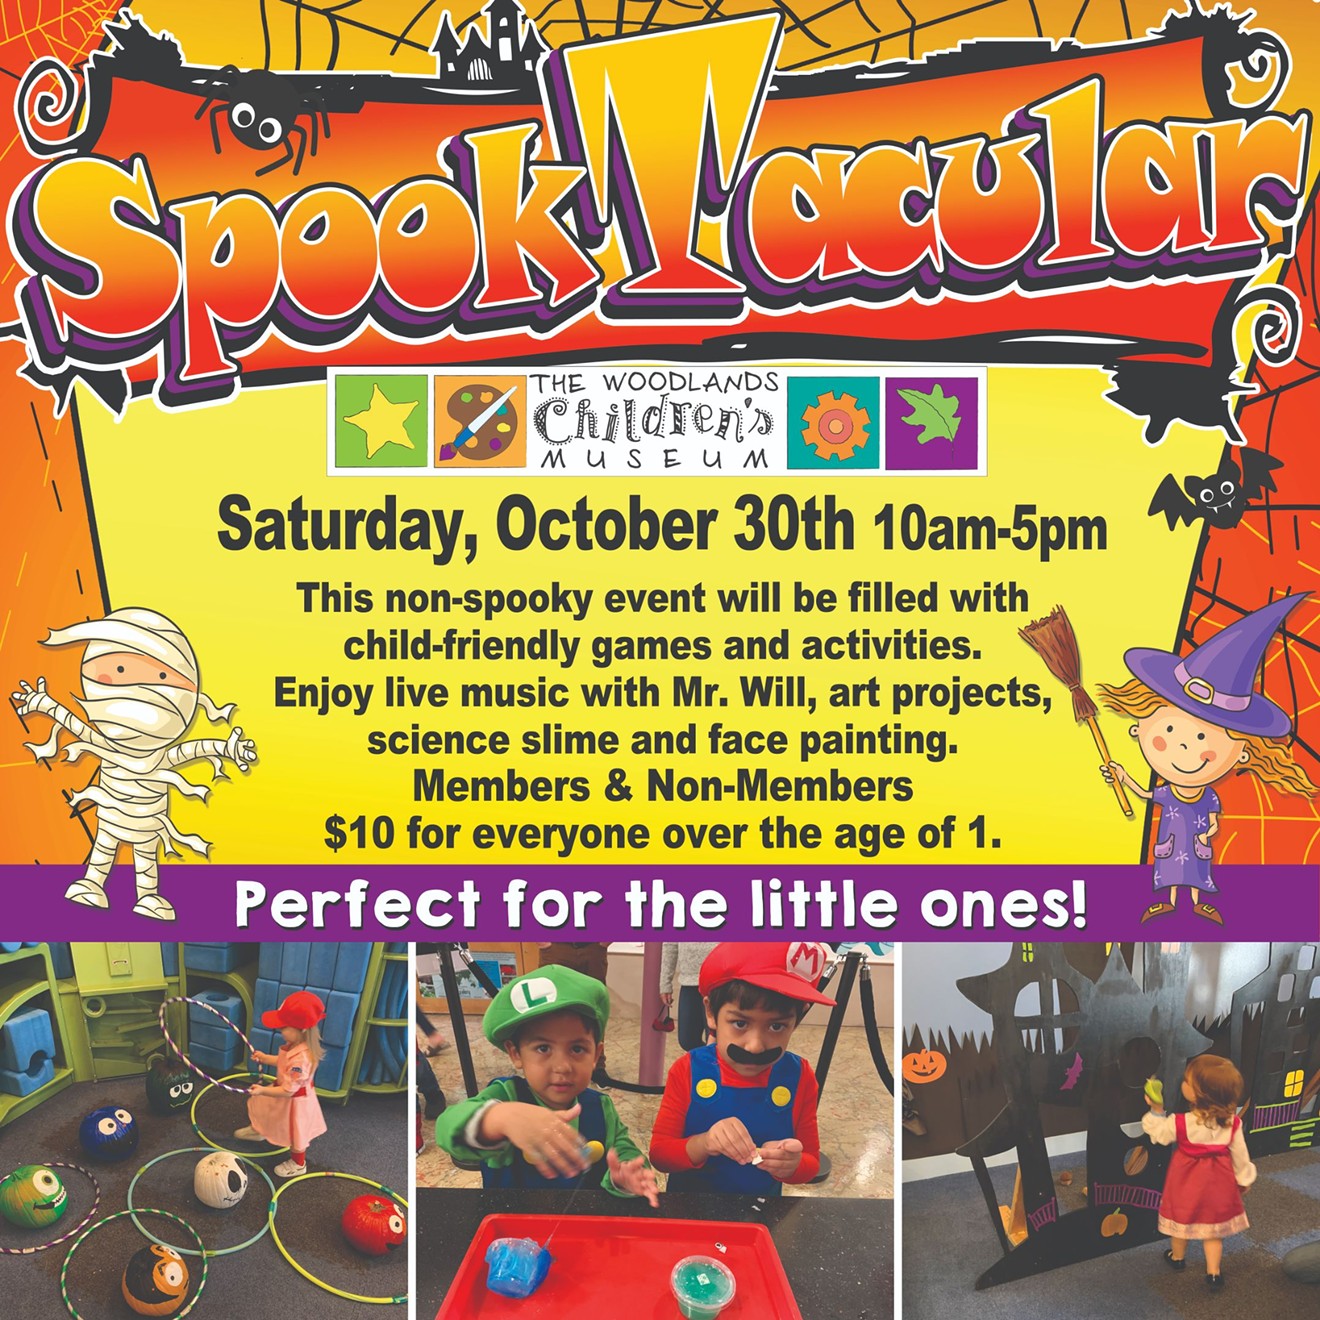 SpookTacular event for the little ones under 7.